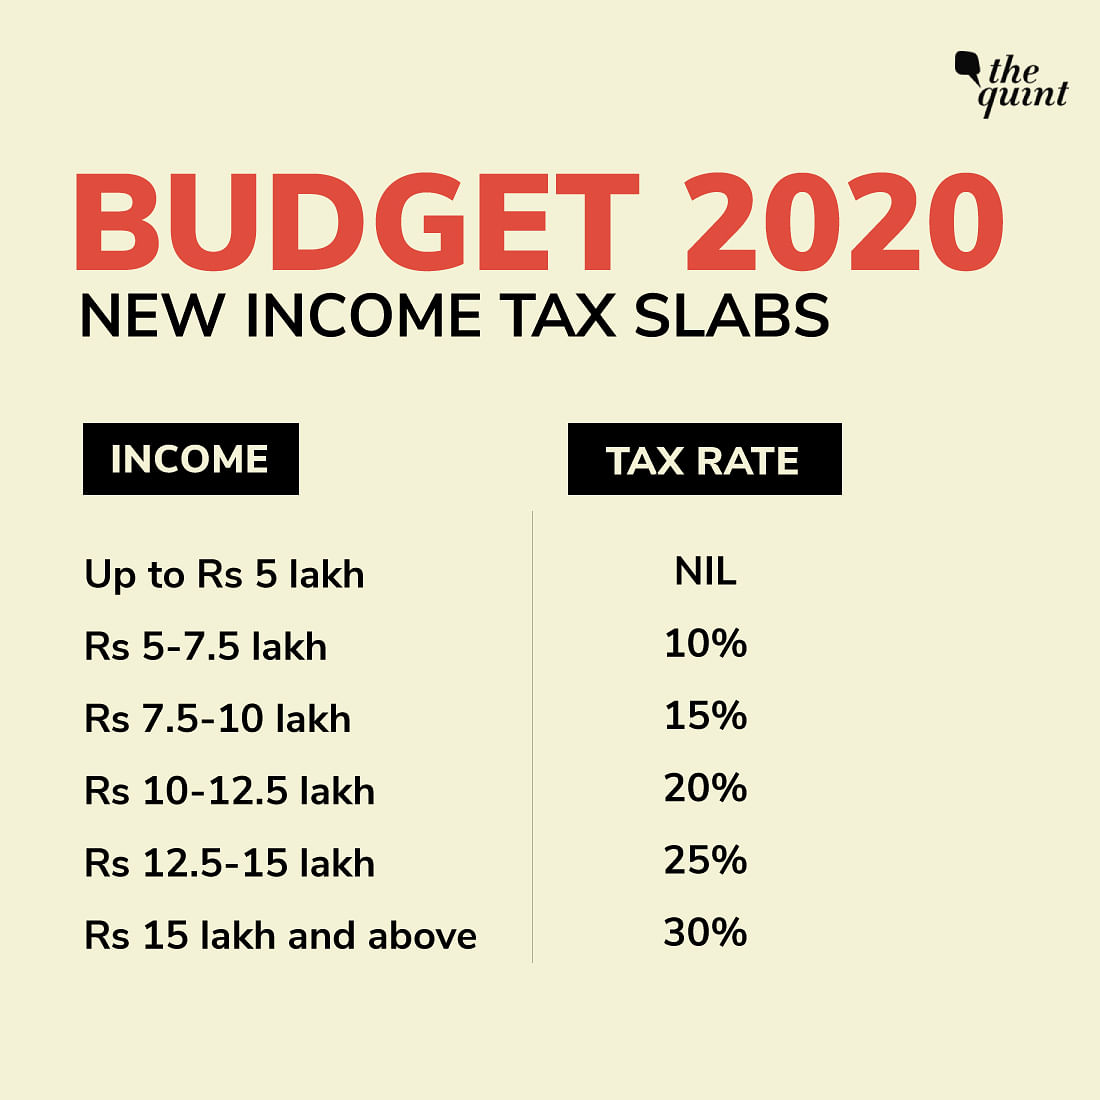 Those opting for the new income tax regime will pay lower taxes but will not be able to avail several exemptions.